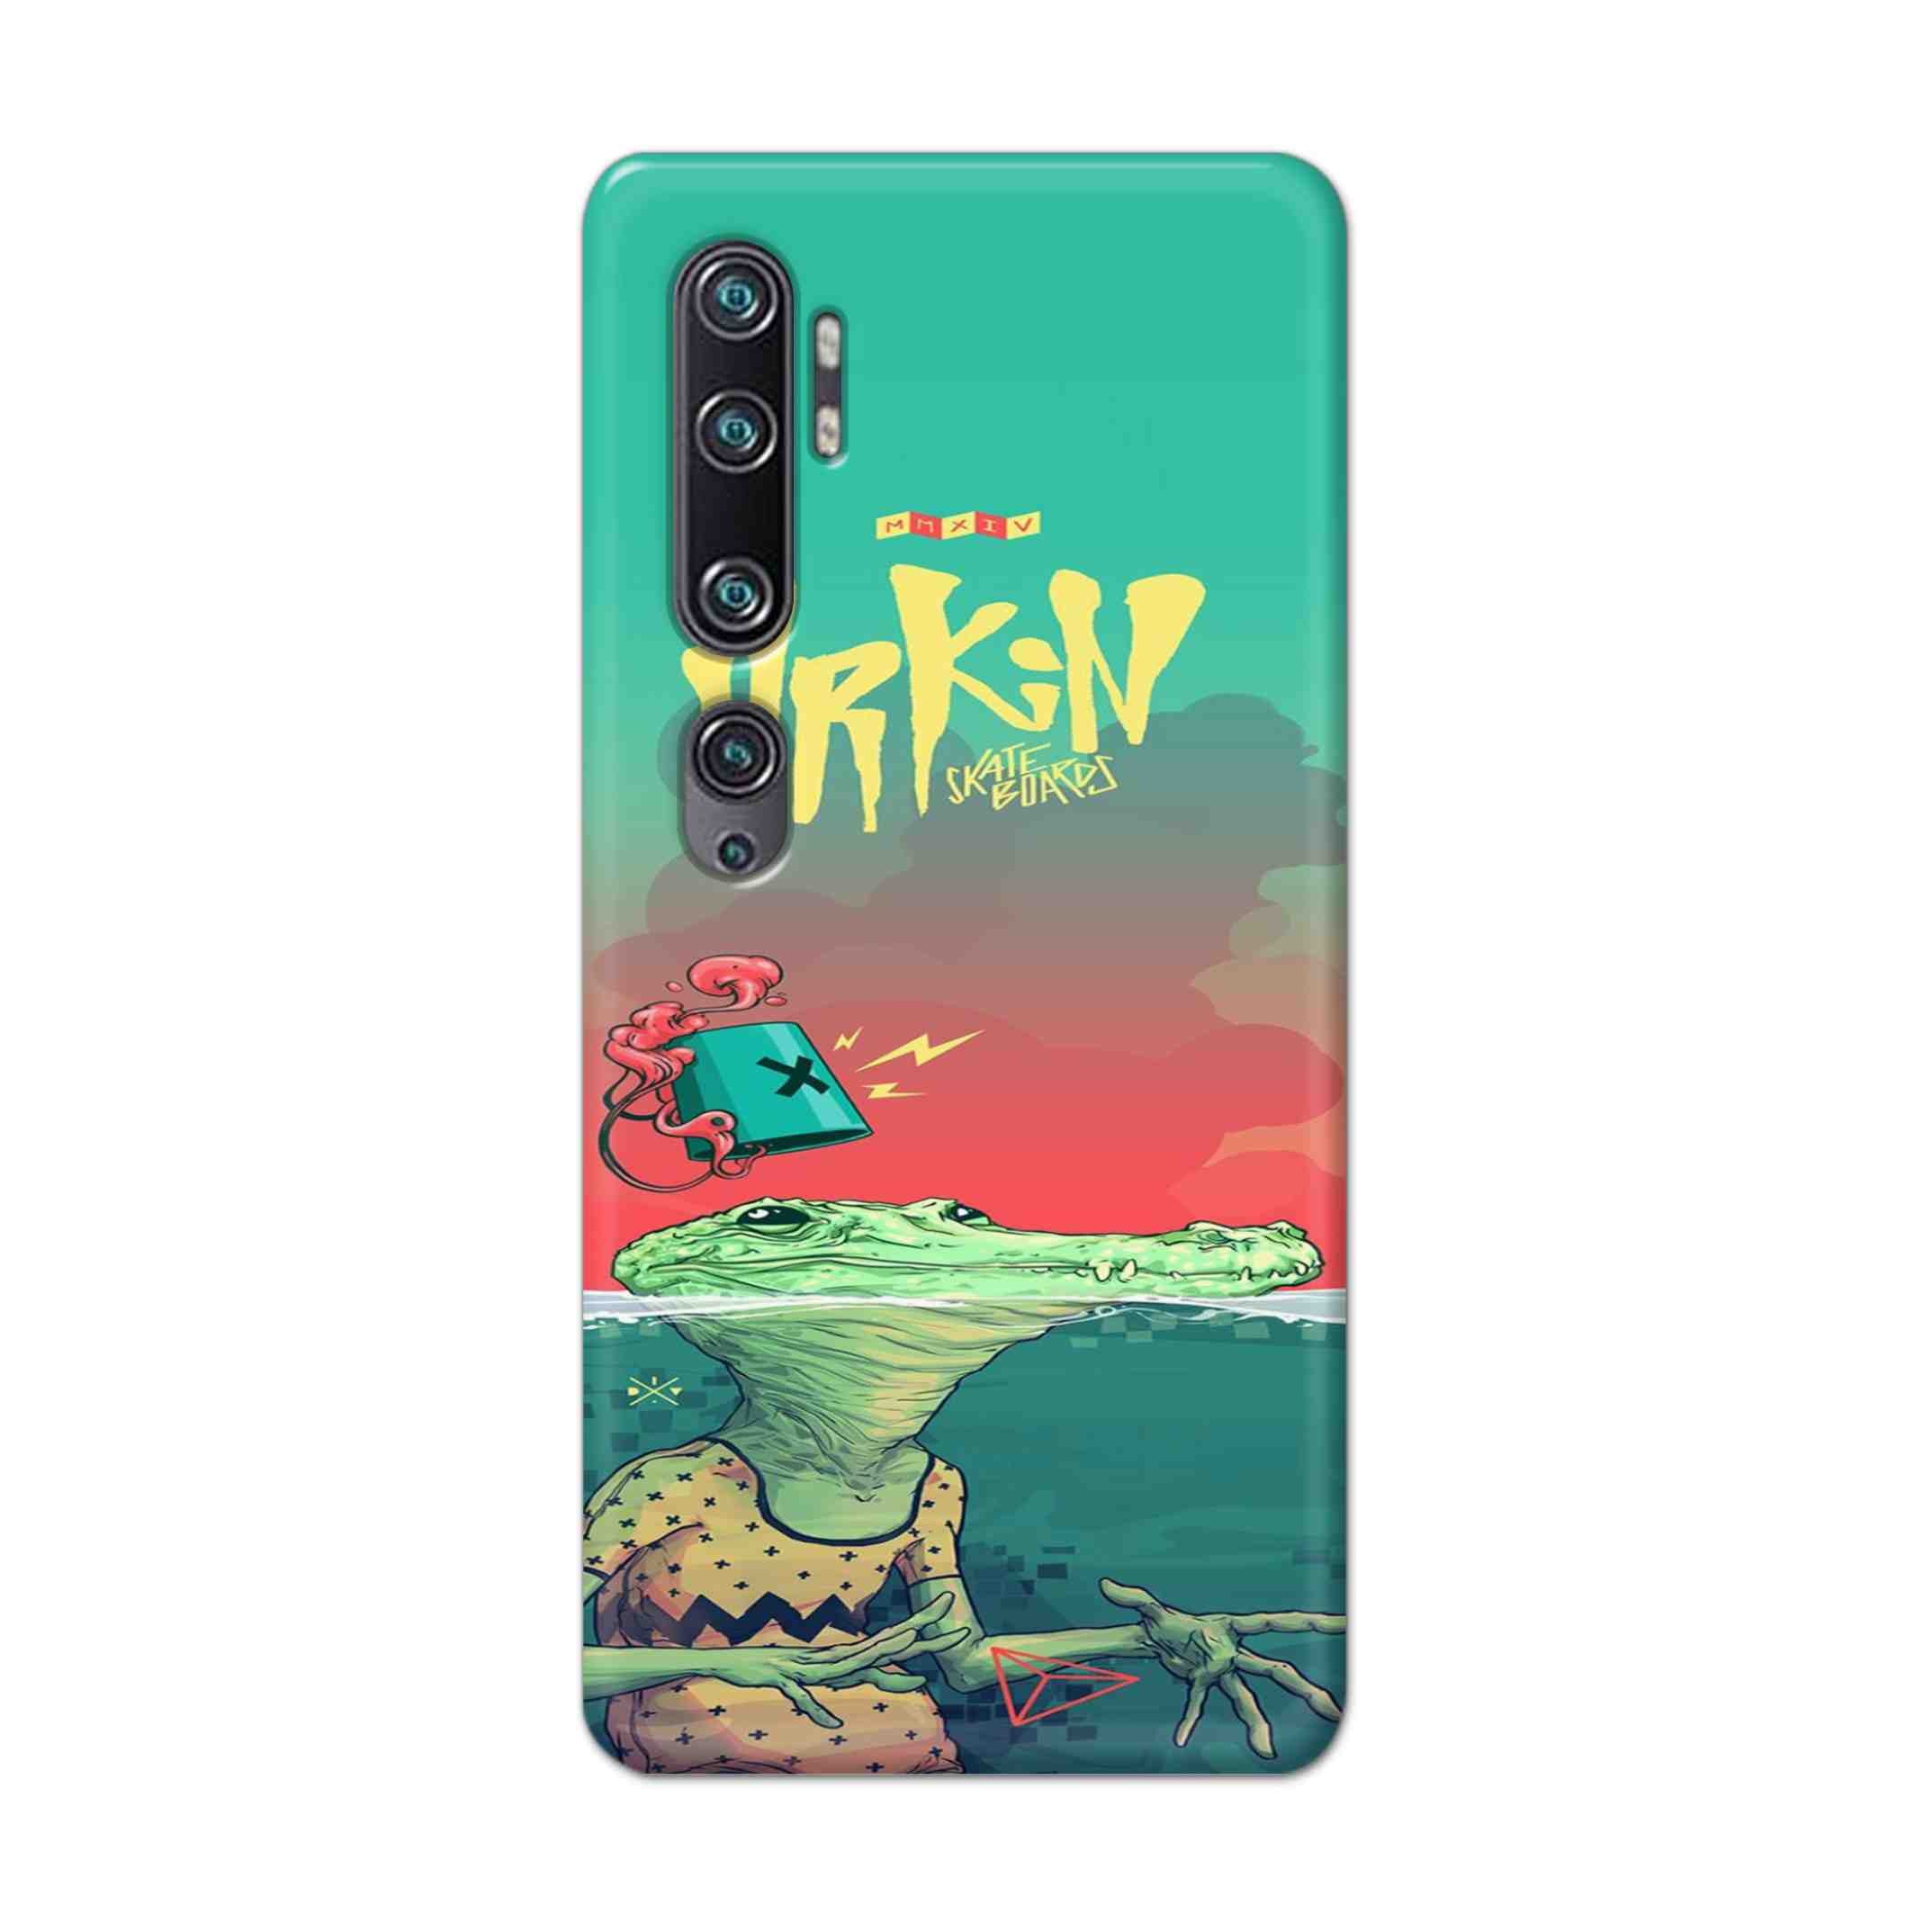 Buy Urkin Hard Back Mobile Phone Case Cover For Xiaomi Mi Note 10 Online